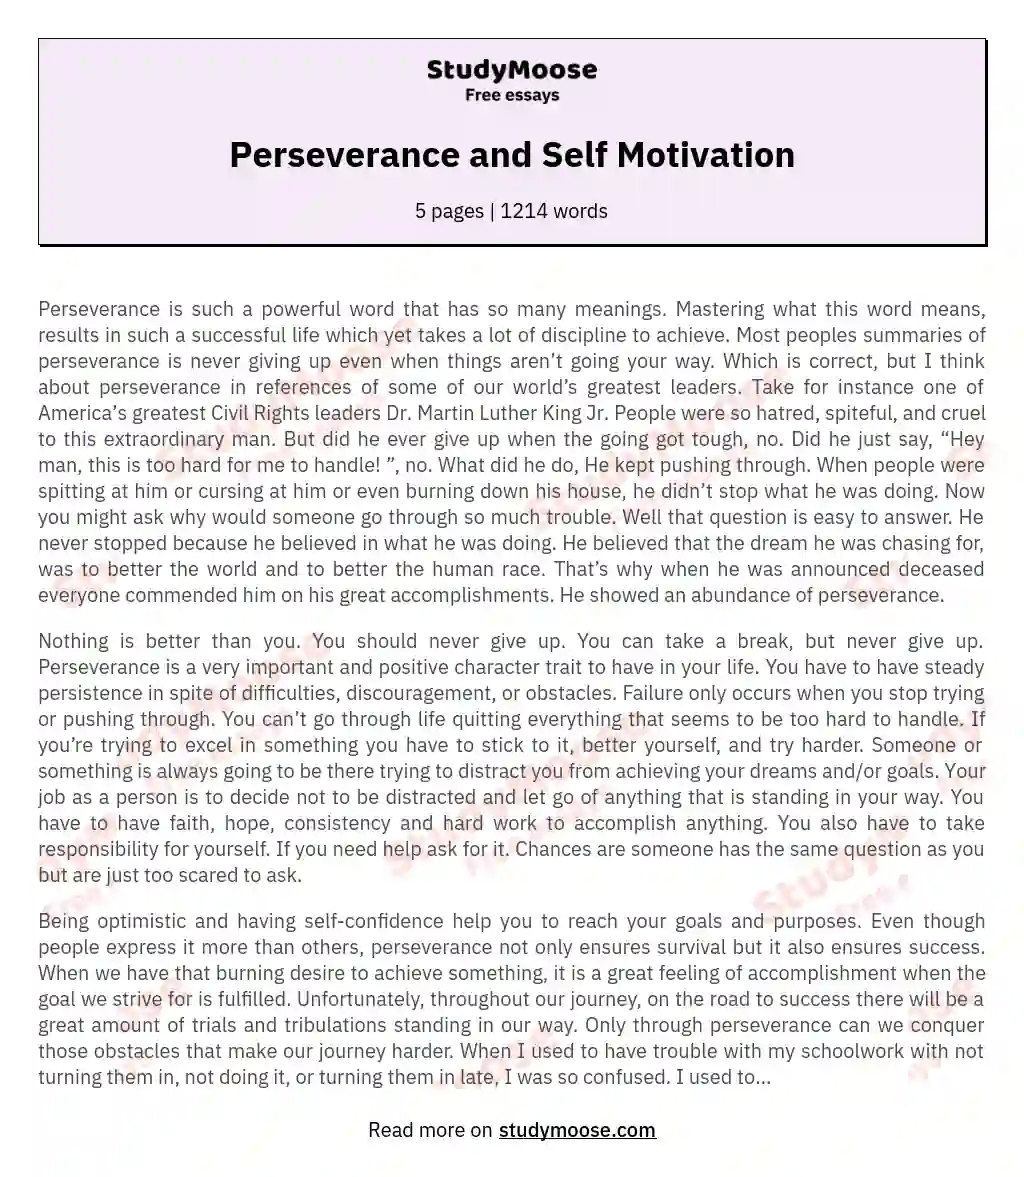 Perseverance and Self Motivation